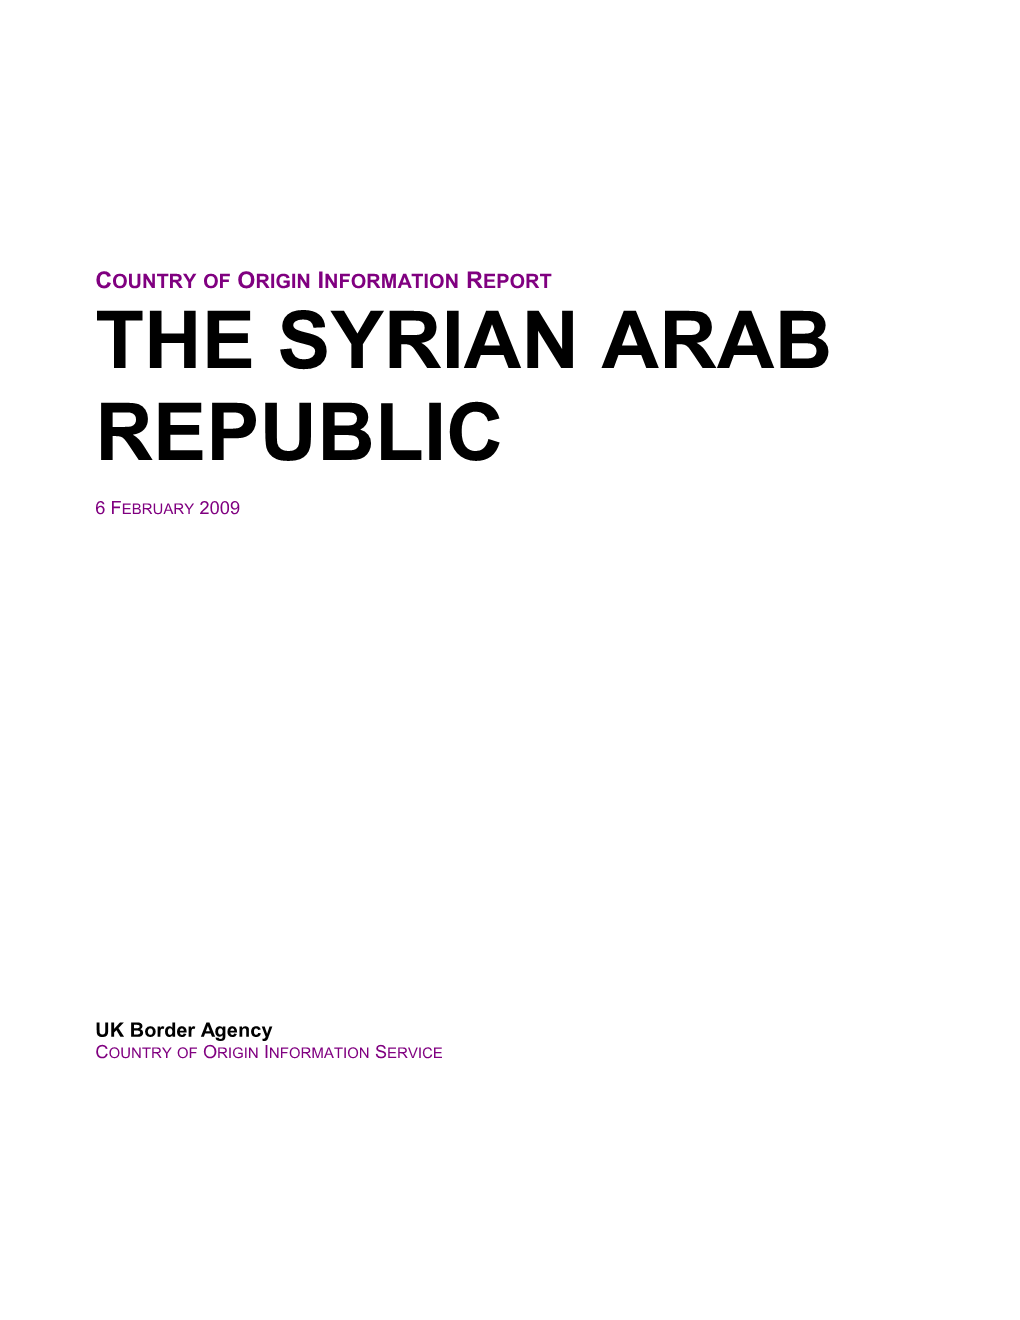 Country of Origin Information Report the Syrian Arab Republic February 2009